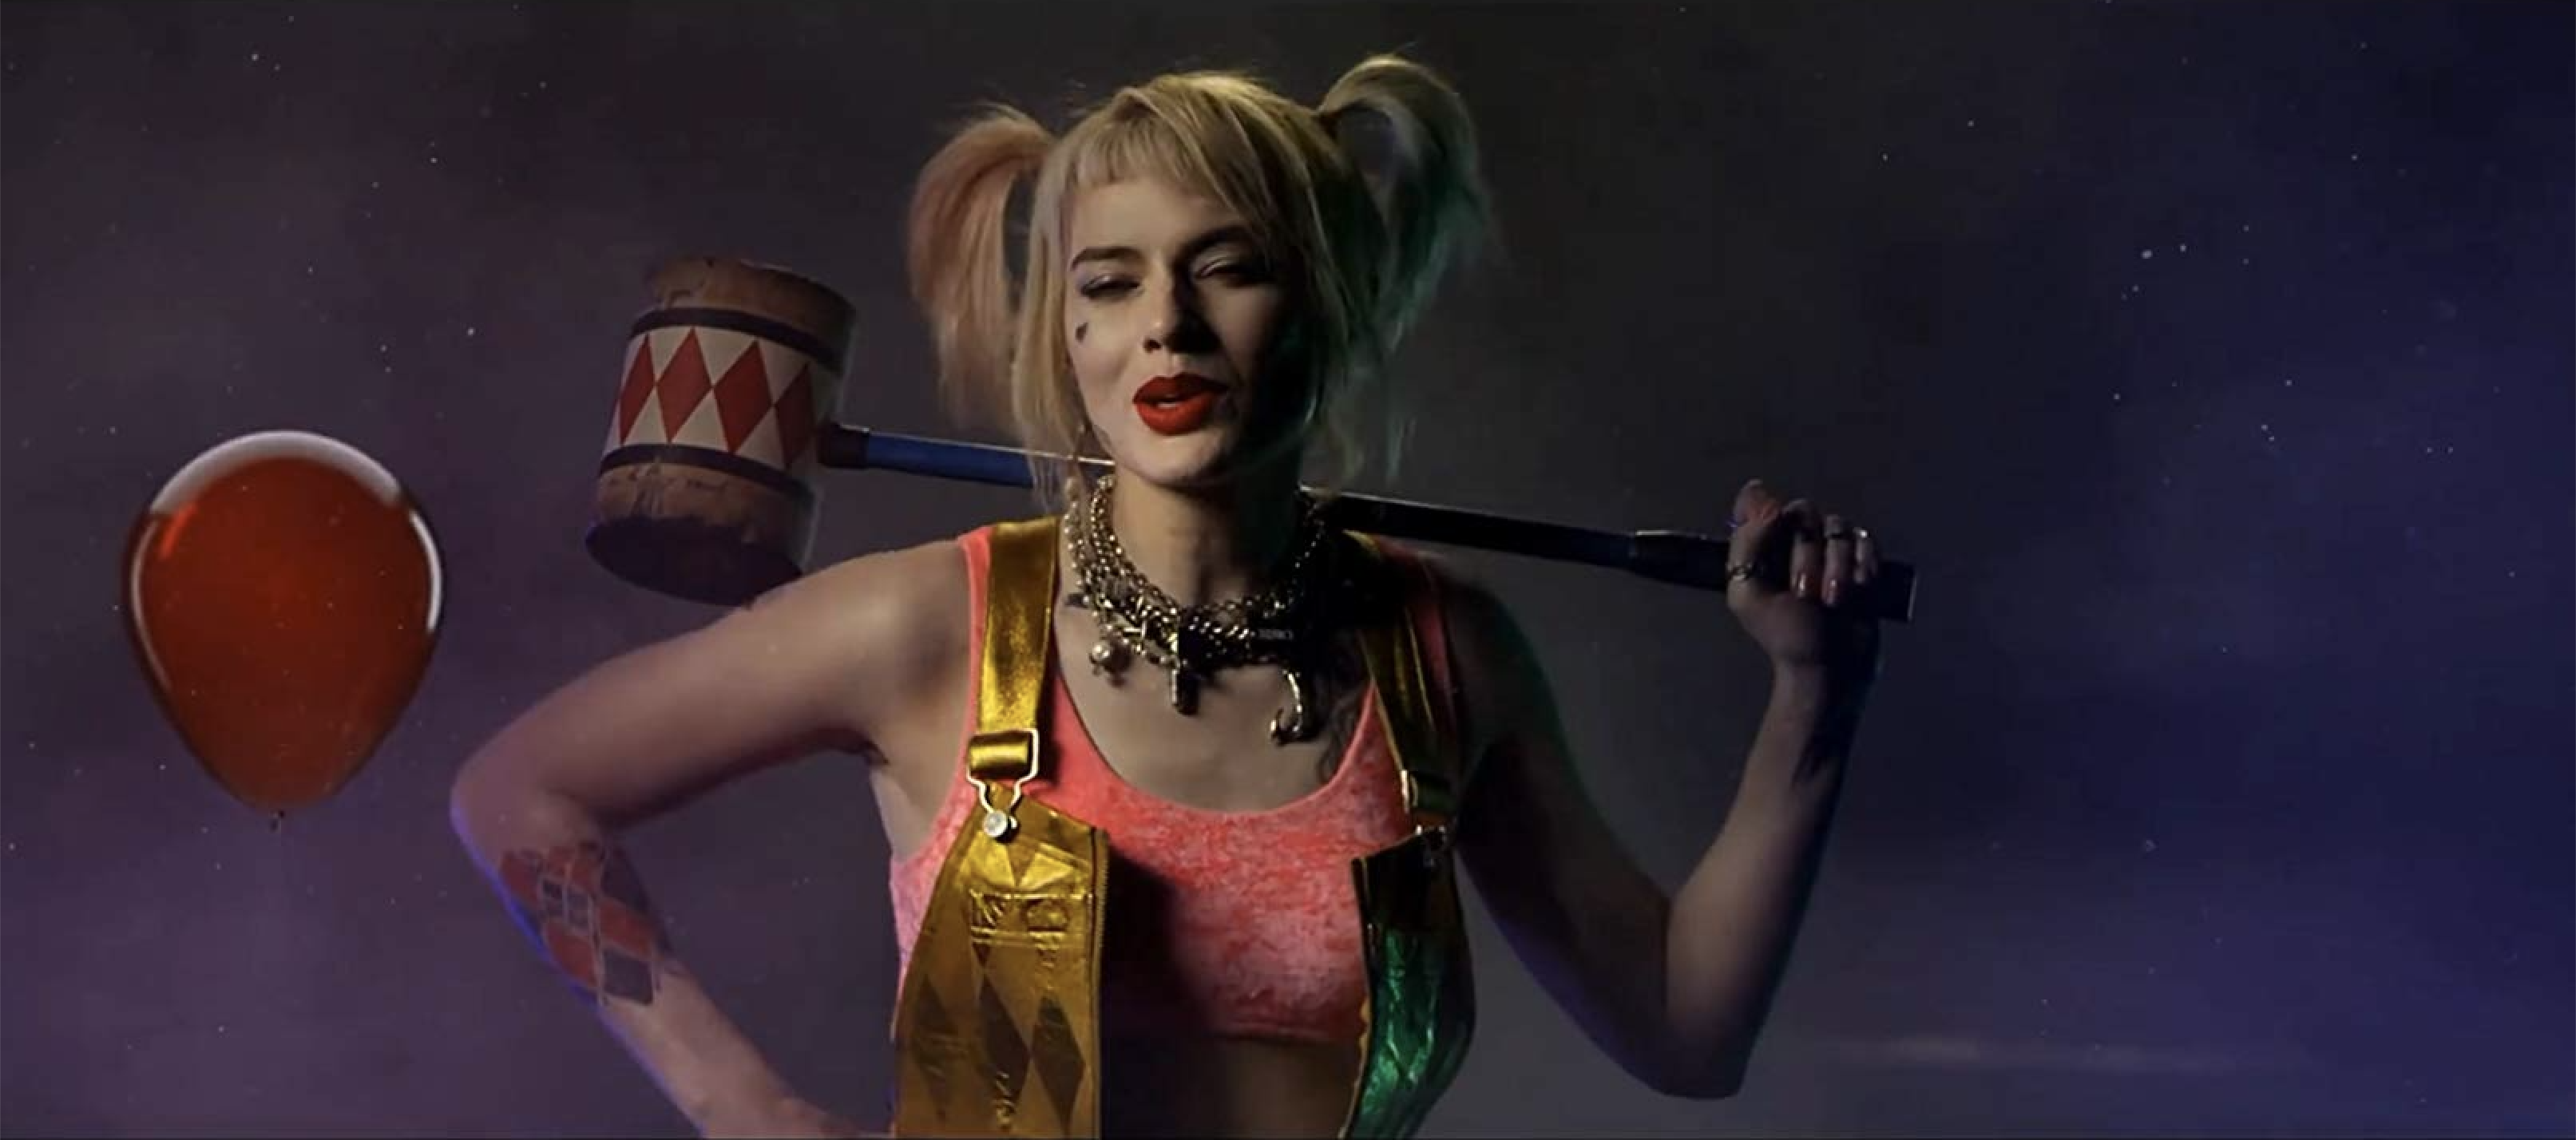 Birds Of Prey And The Fantabulous Emancipation Of One Harley Quinn 2020 Reviews And Overview